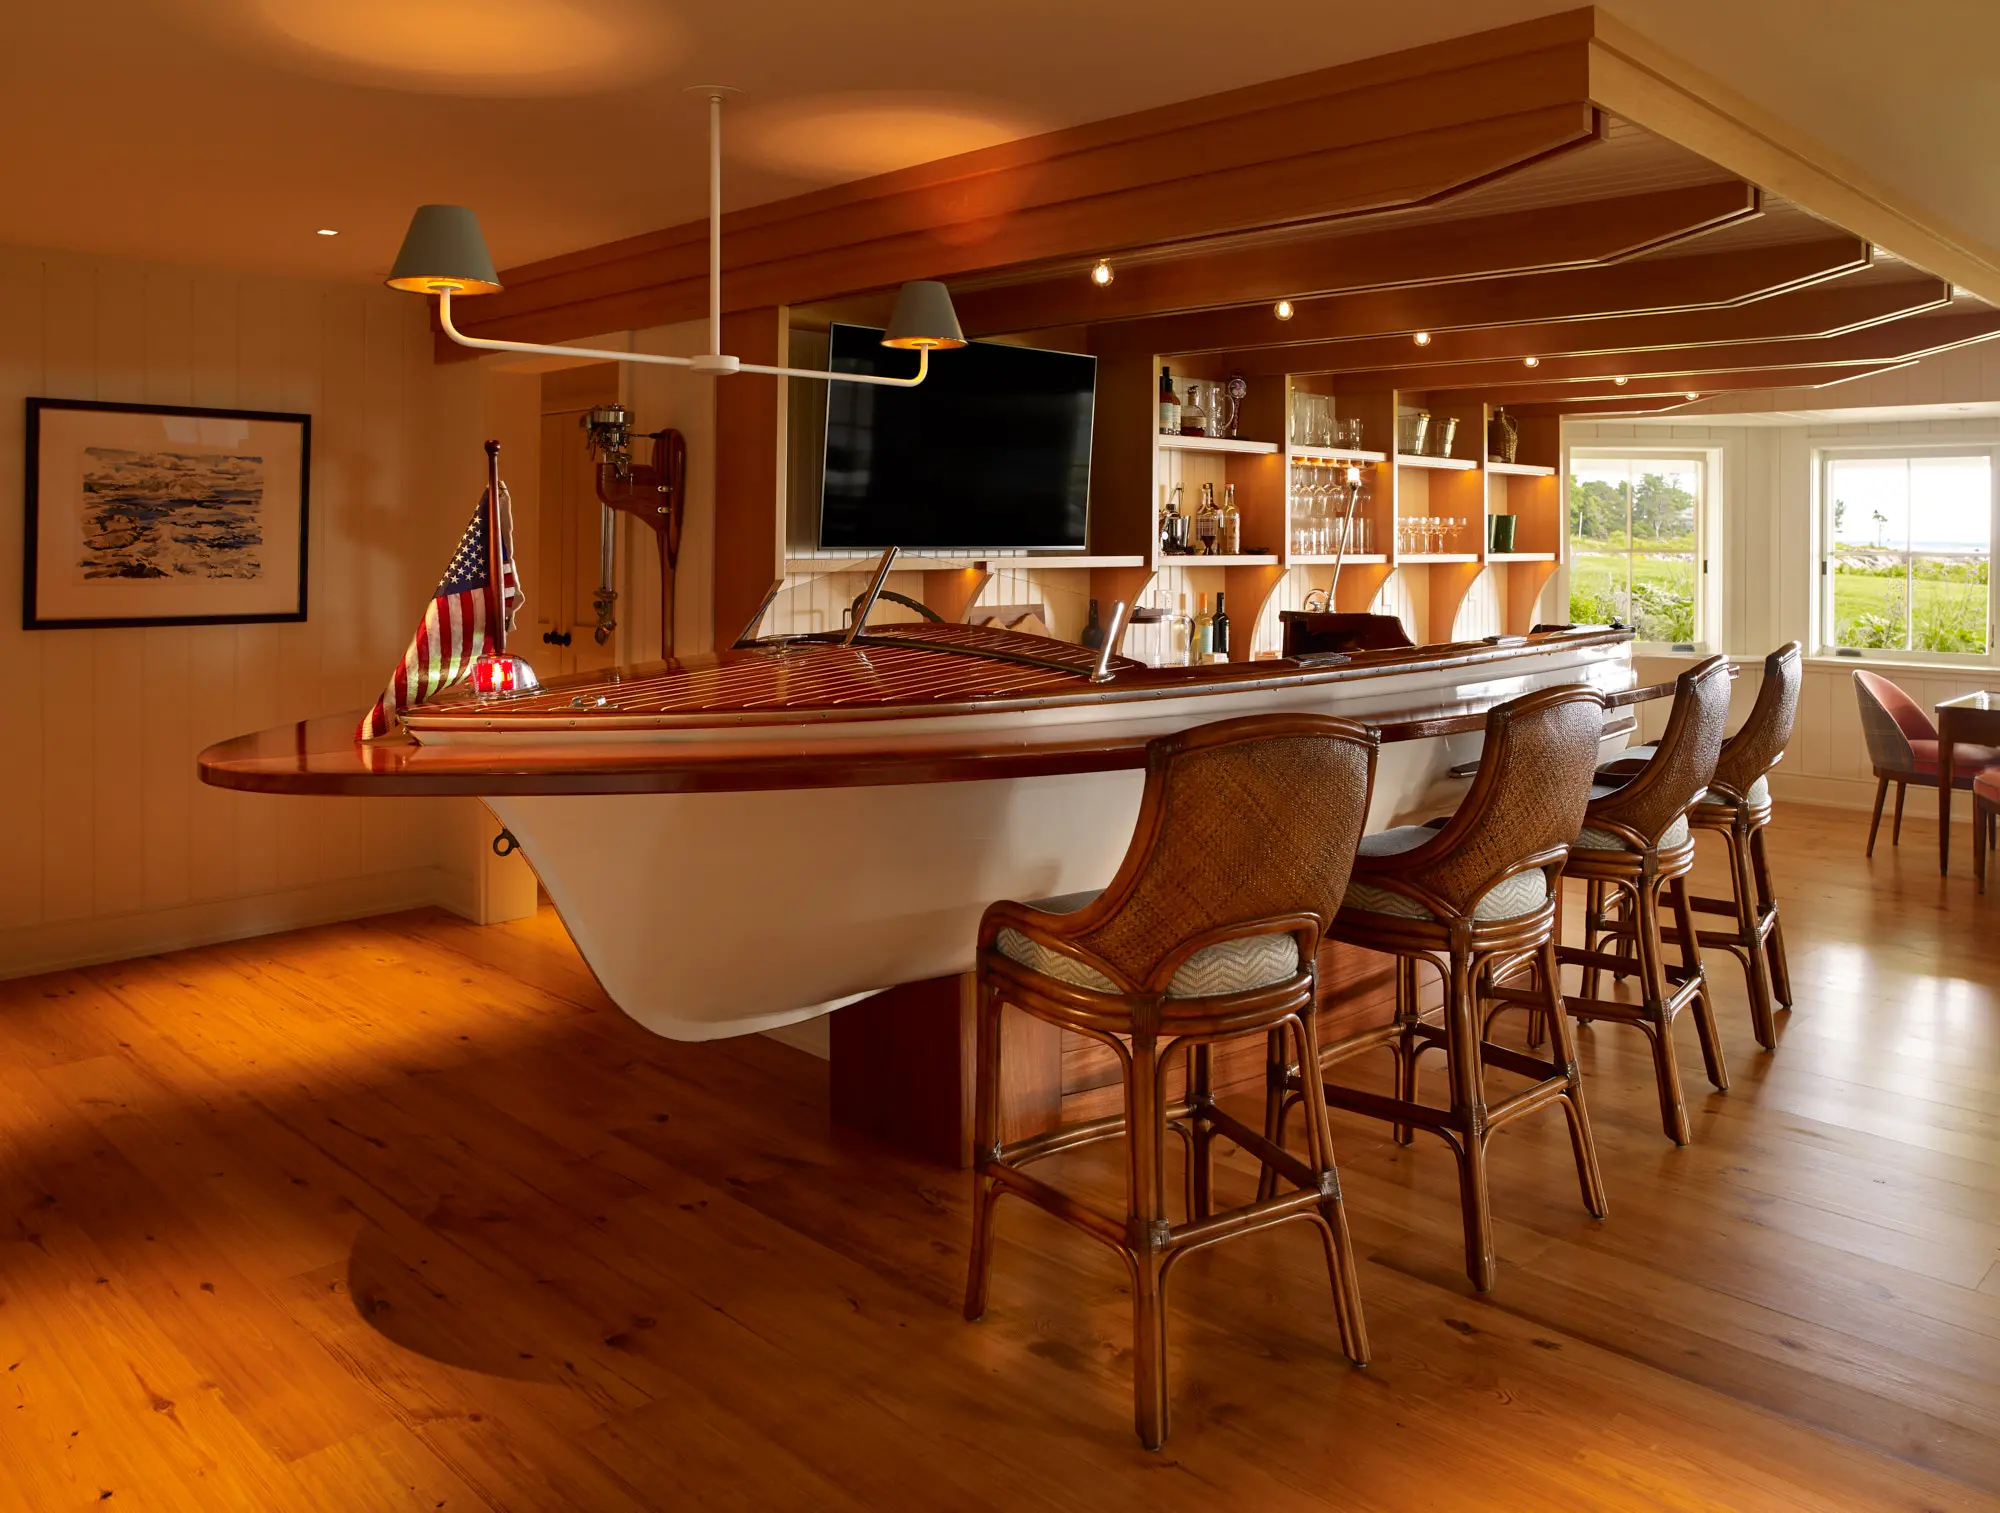 The nautical bar that features a boat as the bar and detailing on the ceiling.